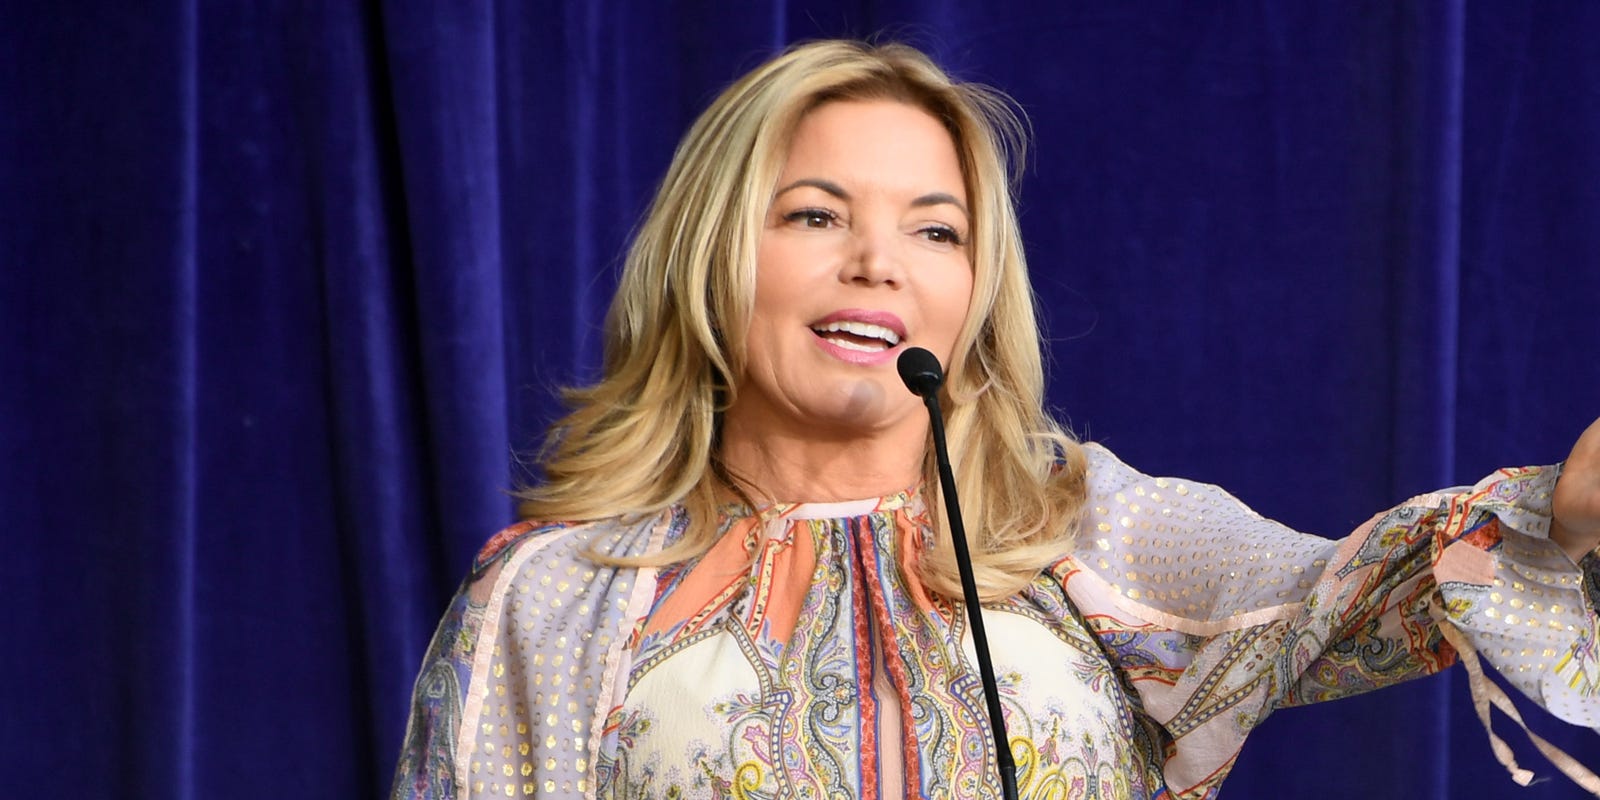 Opinion: With Magic out, owner Jeanie Buss faces defining moment in her Lak...